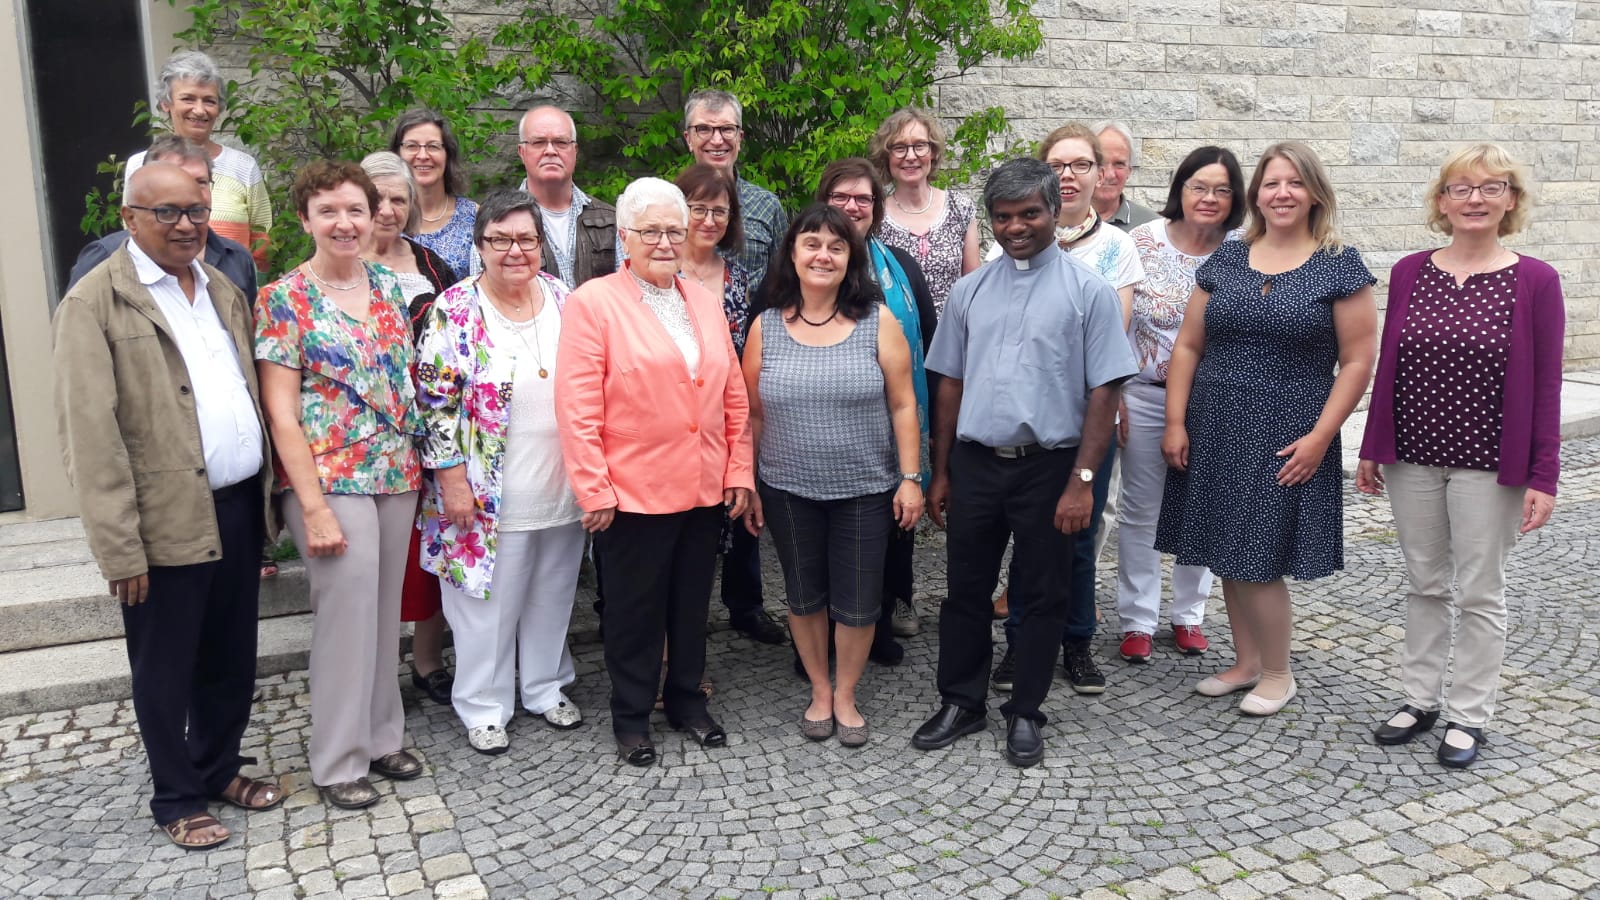 Pater Francis am 18. August 2019 in Kulmbach